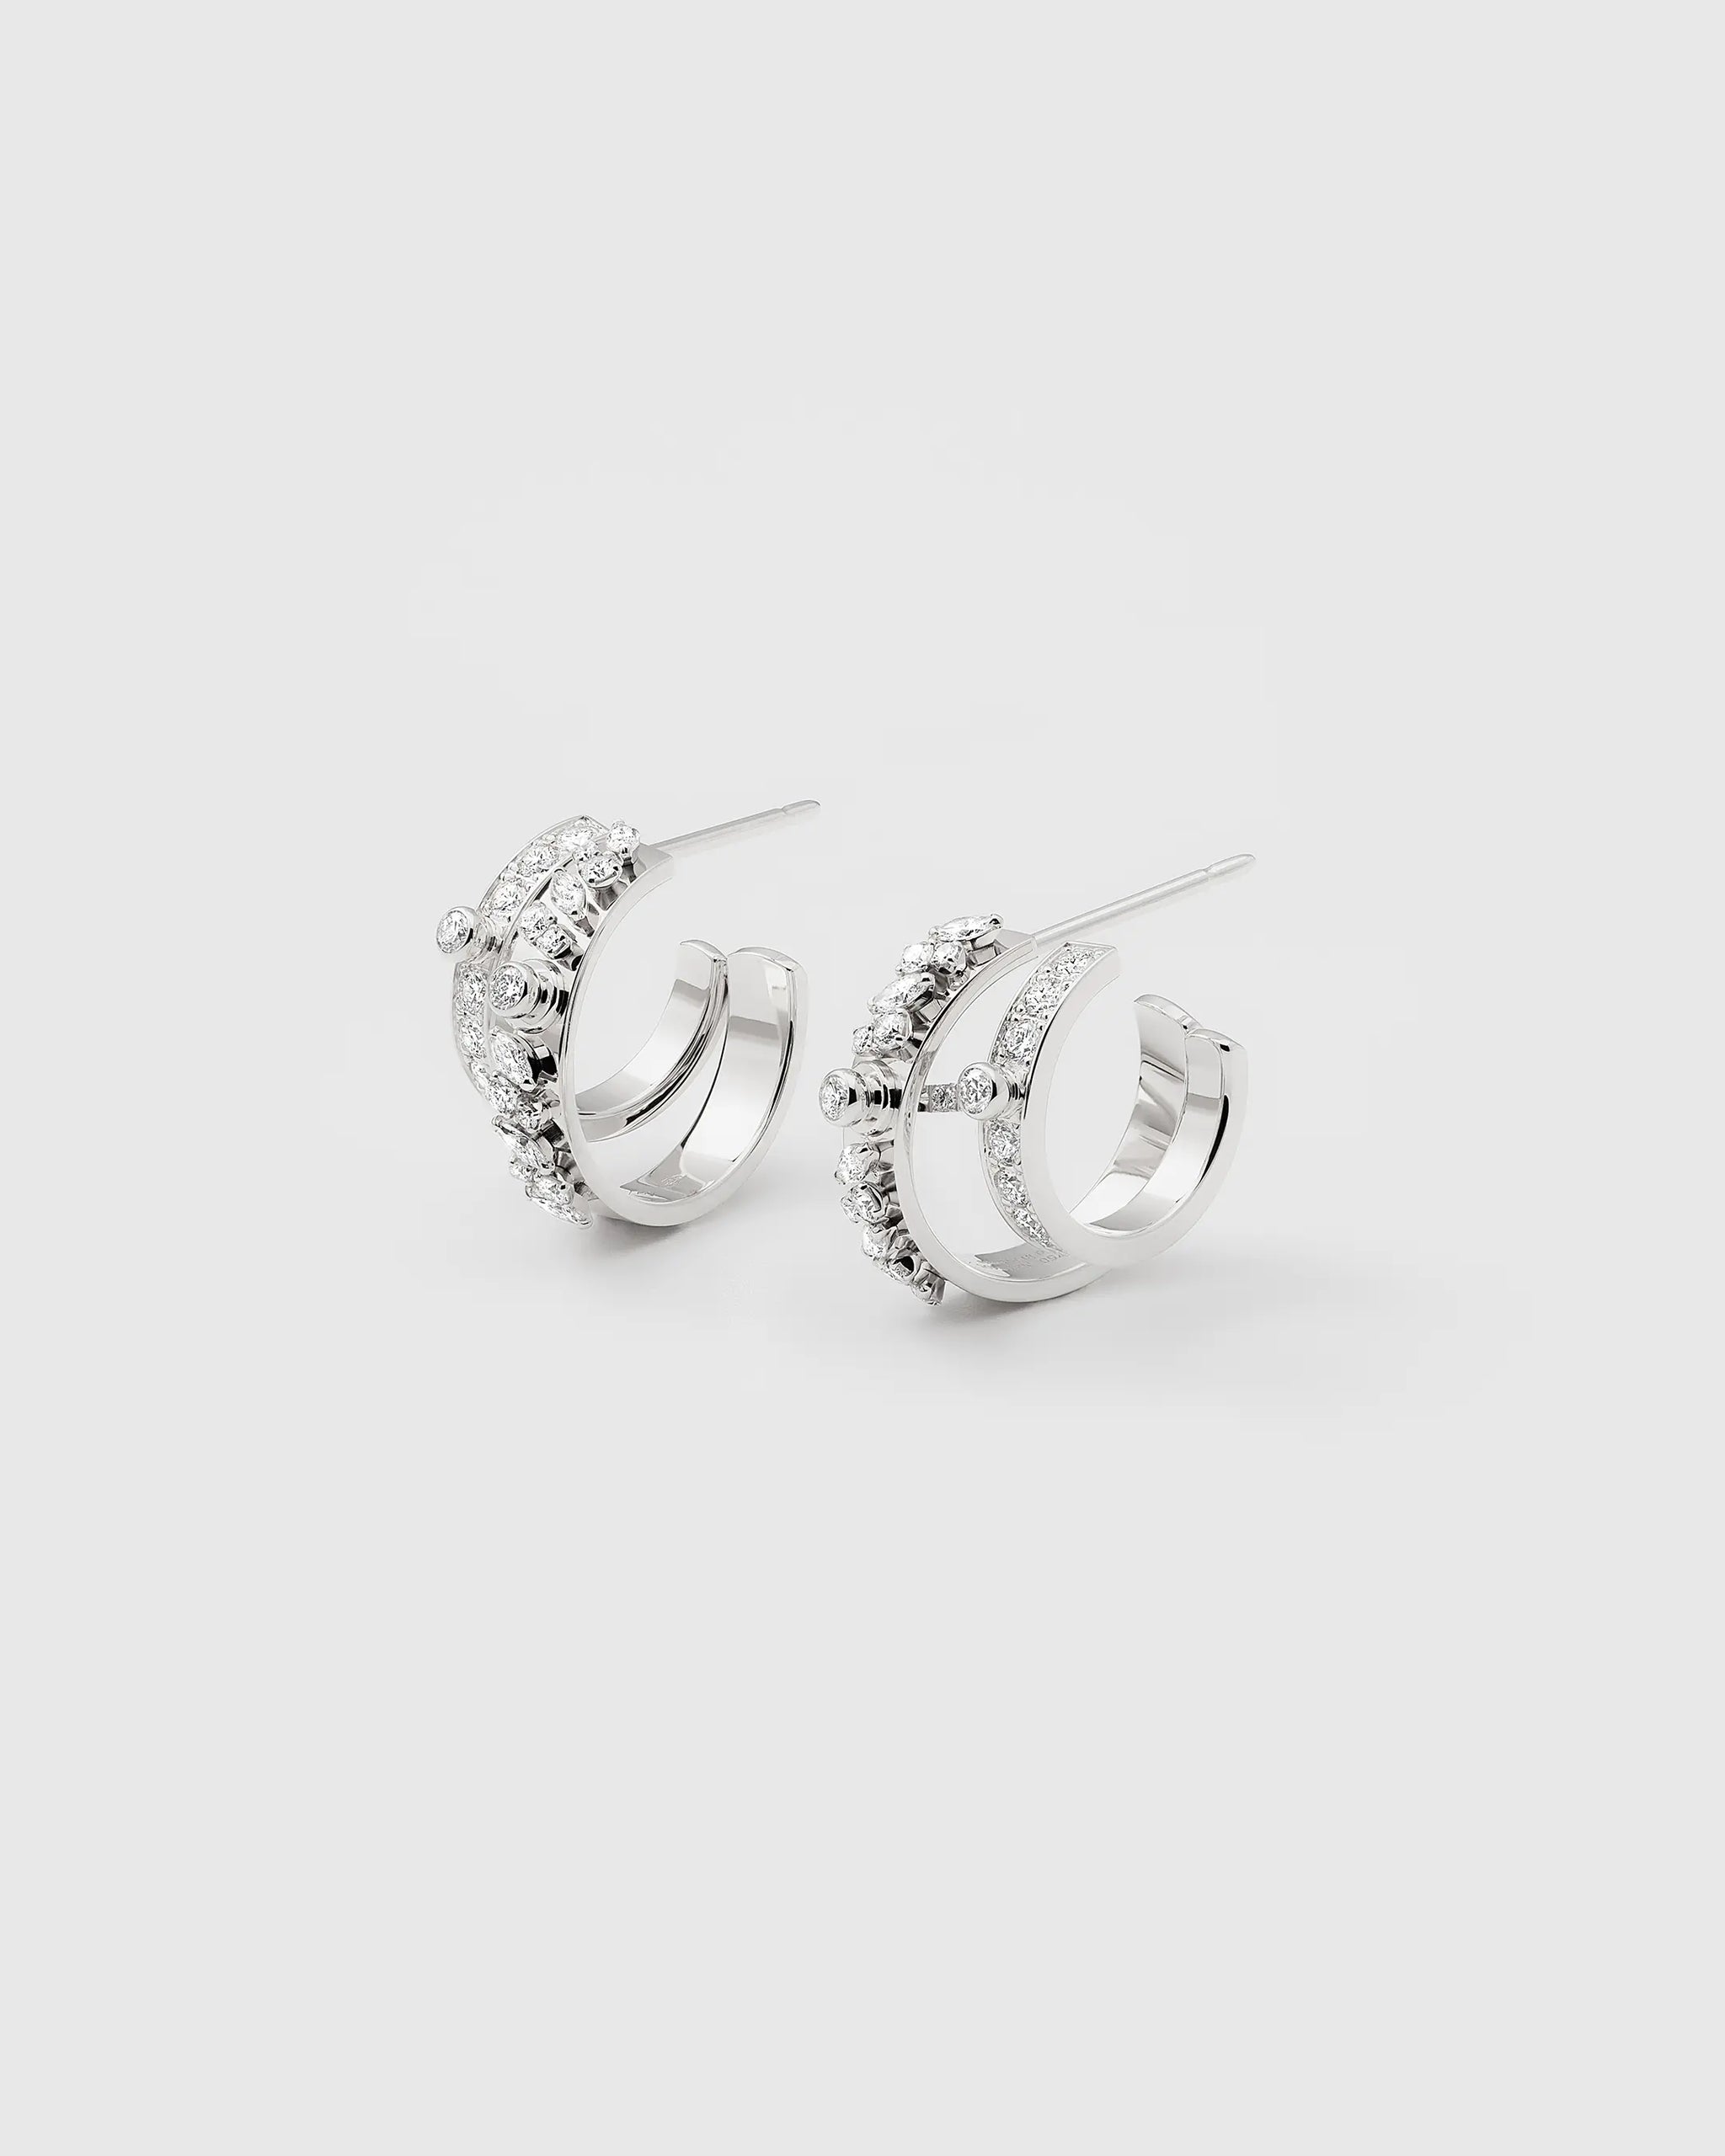 Under The Stars Mood Hoops in White Gold - 1 - Nouvel Heritage